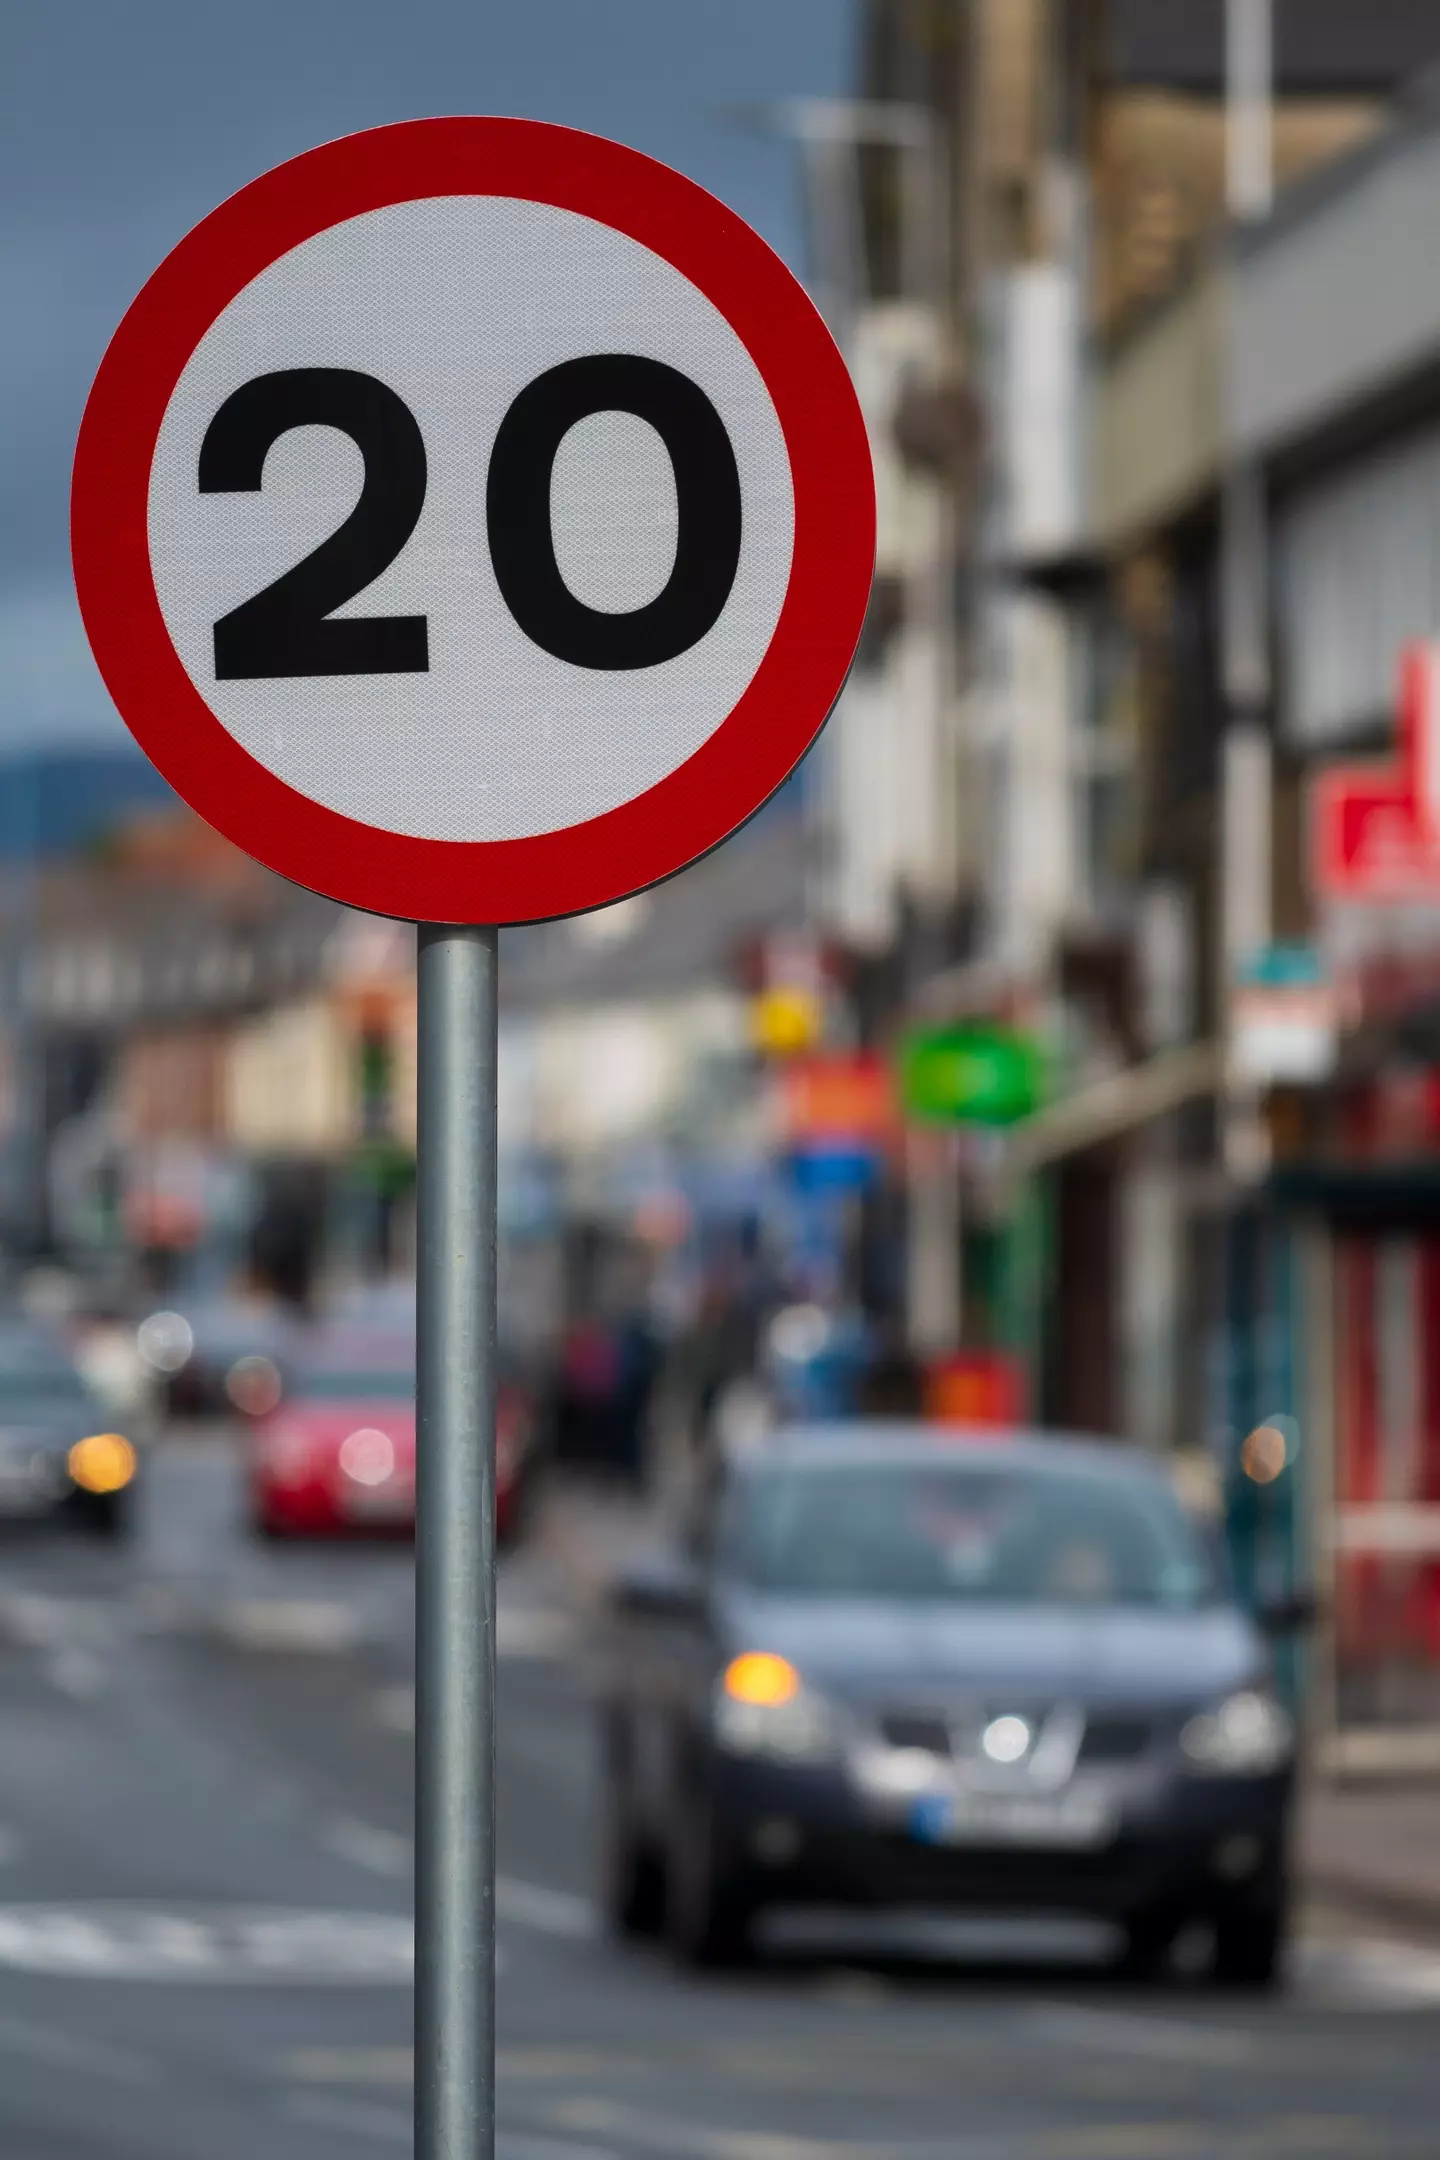 The majority of more residential and pedestrian areas will now have a limit of 20mph.